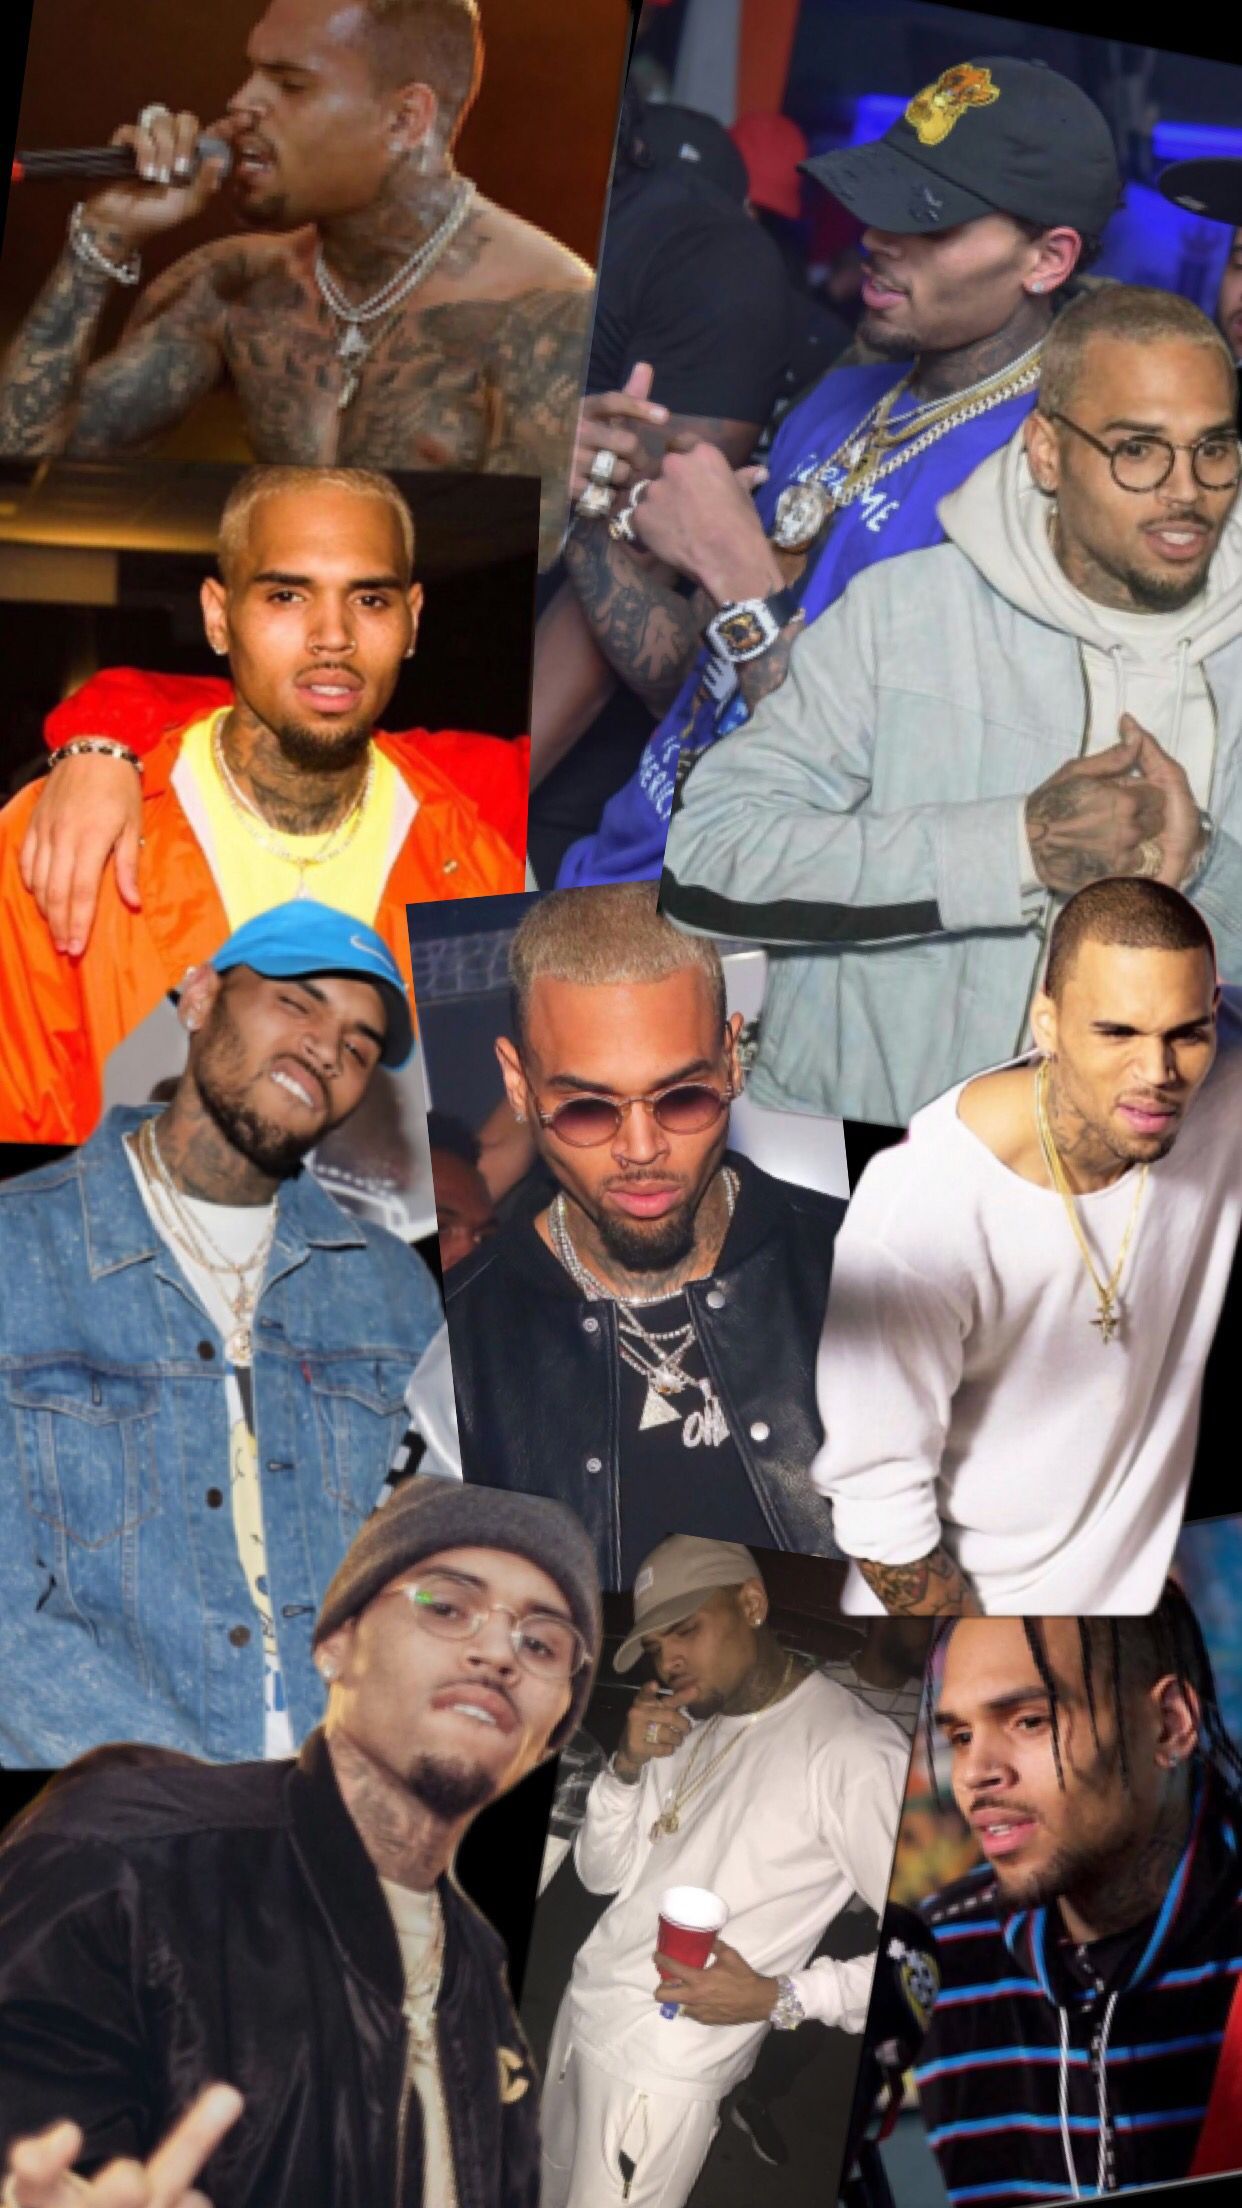 Chris Brown. Chris brown, Breezy chris brown, Chris brown picture